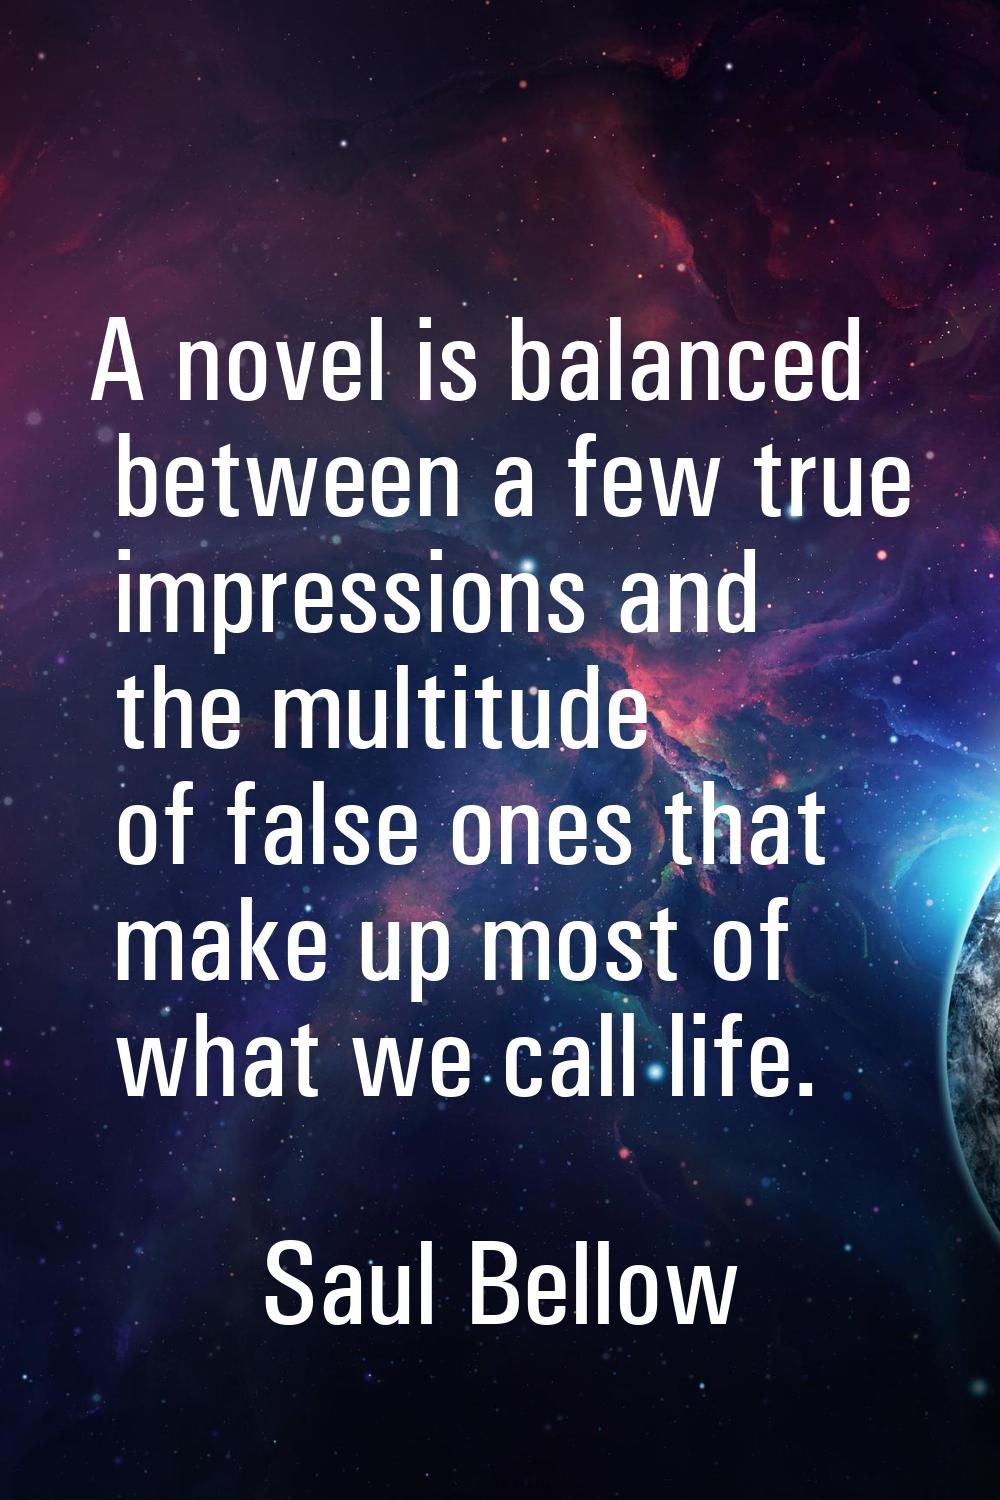 A novel is balanced between a few true impressions and the multitude of false ones that make up mos